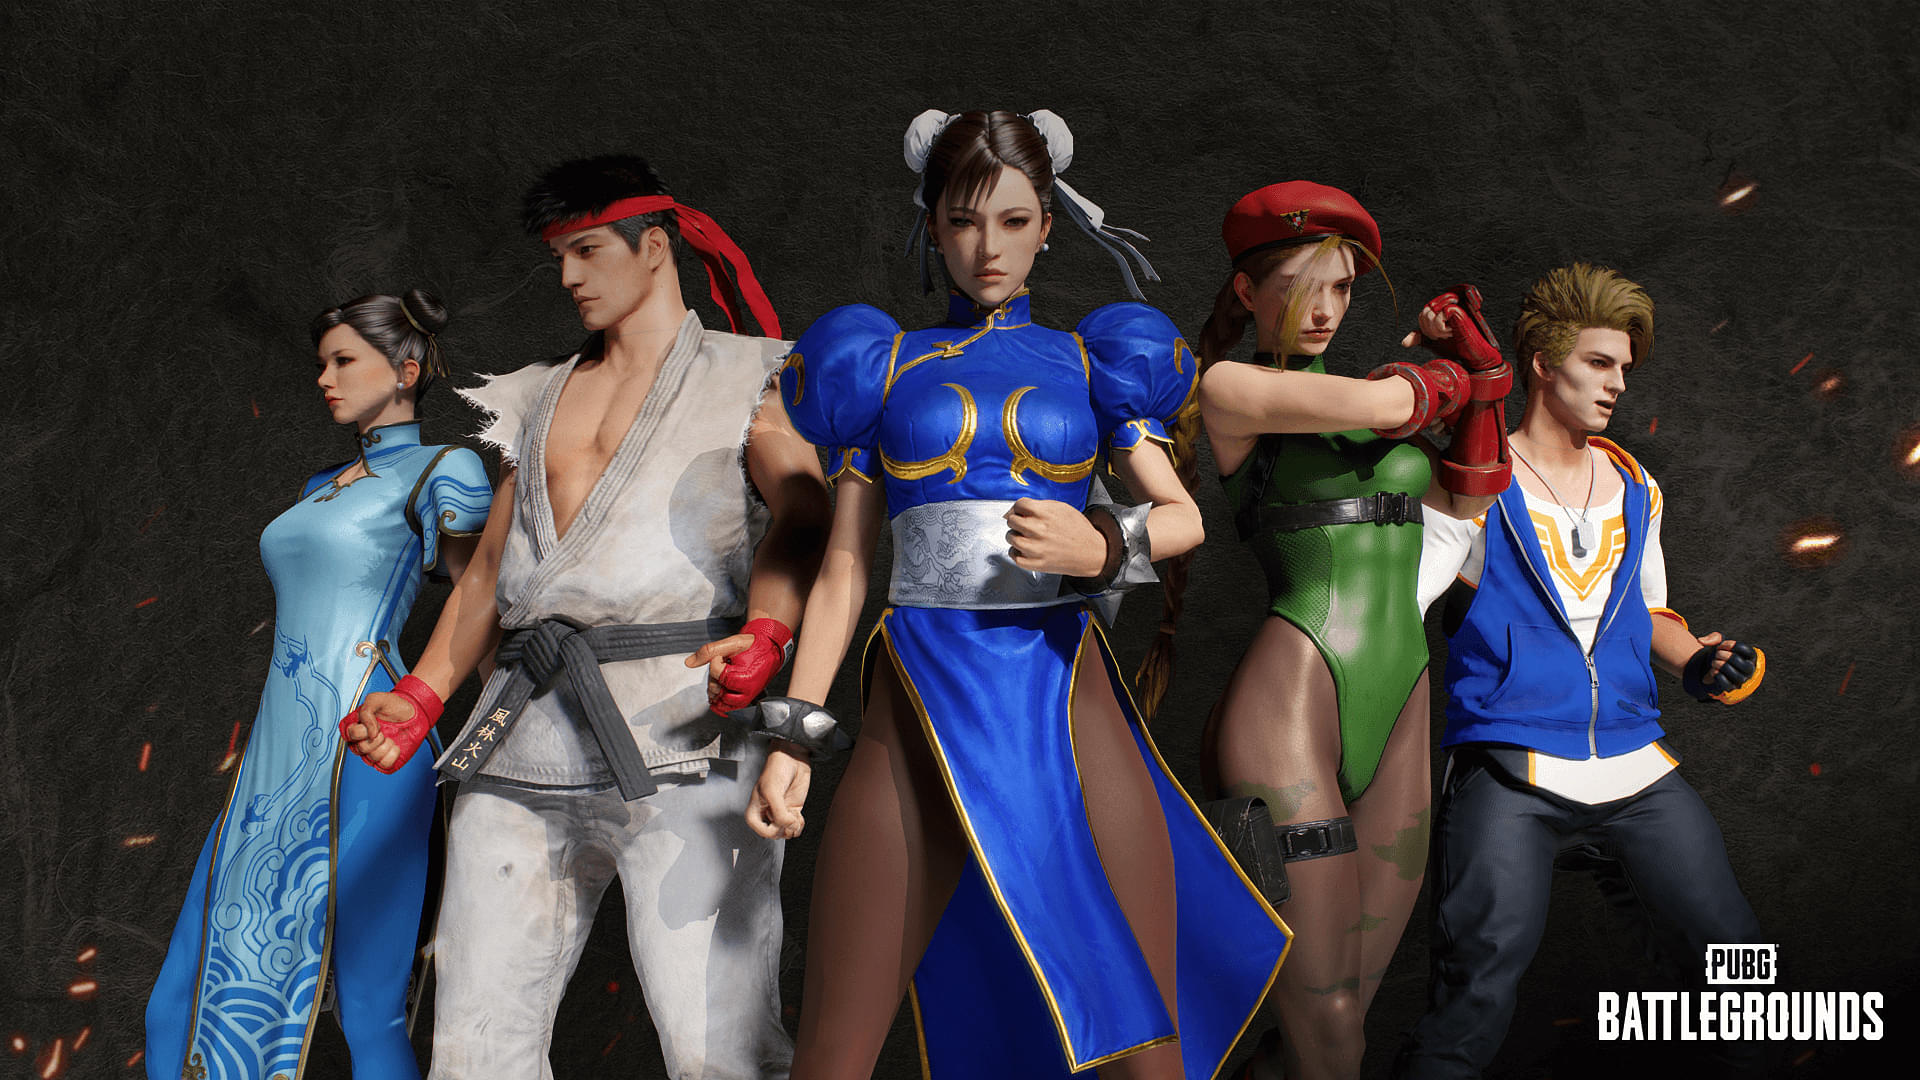 An image showing iconic Street Fighter characters like Ryu, Chun-Li, Cammy and others in PUBG: Battlegrounds